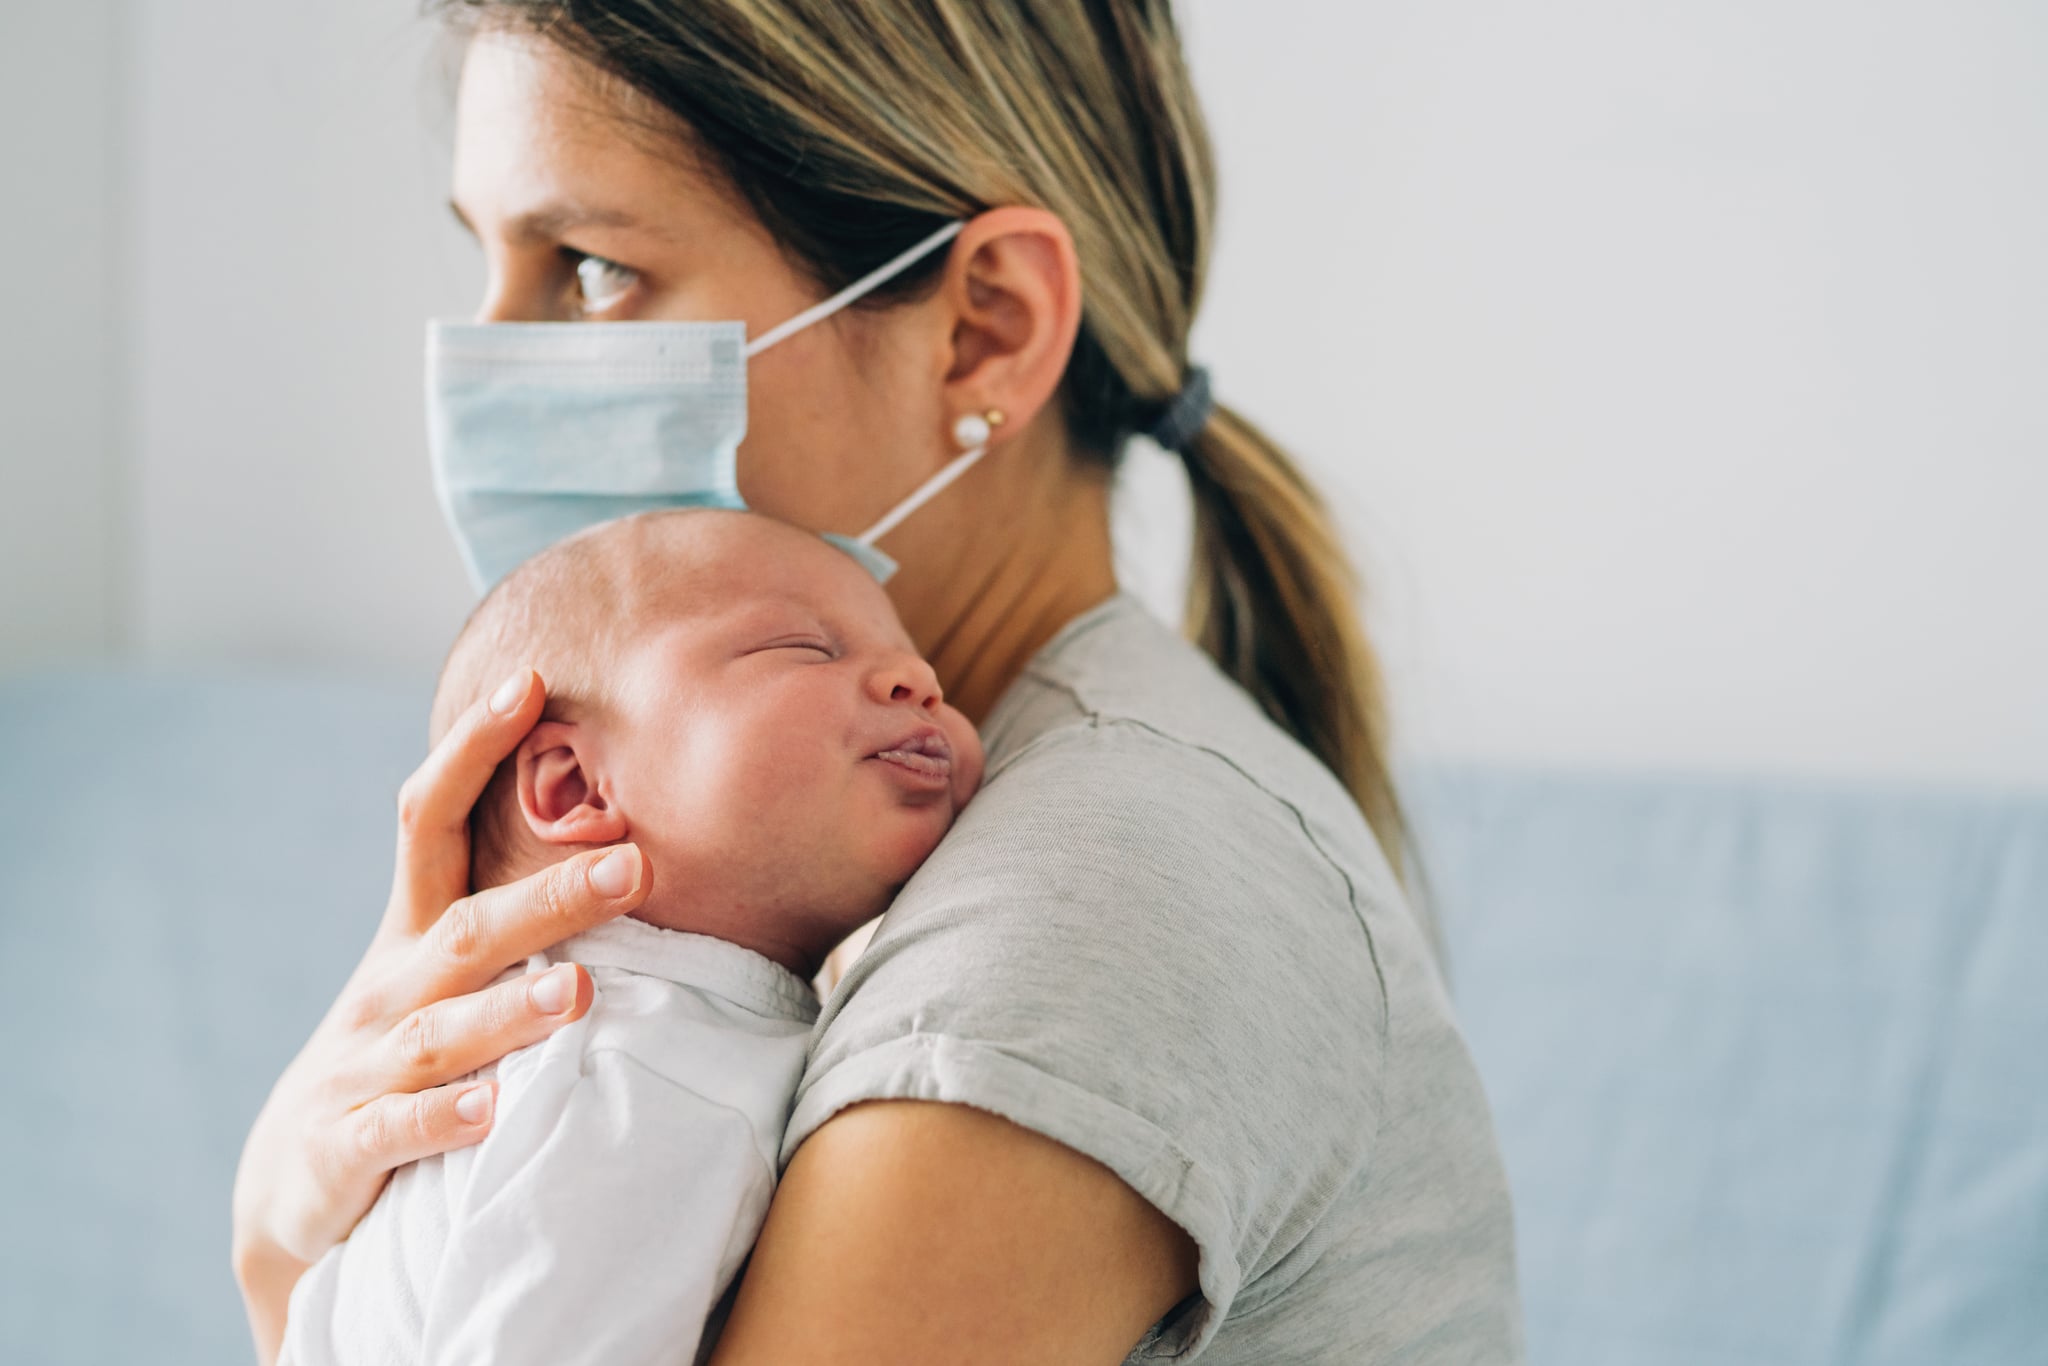 Young mother with protective mask embracing  her newborn baby girl while they are in home isolation during coronavirus/COVID-19 quarantine.